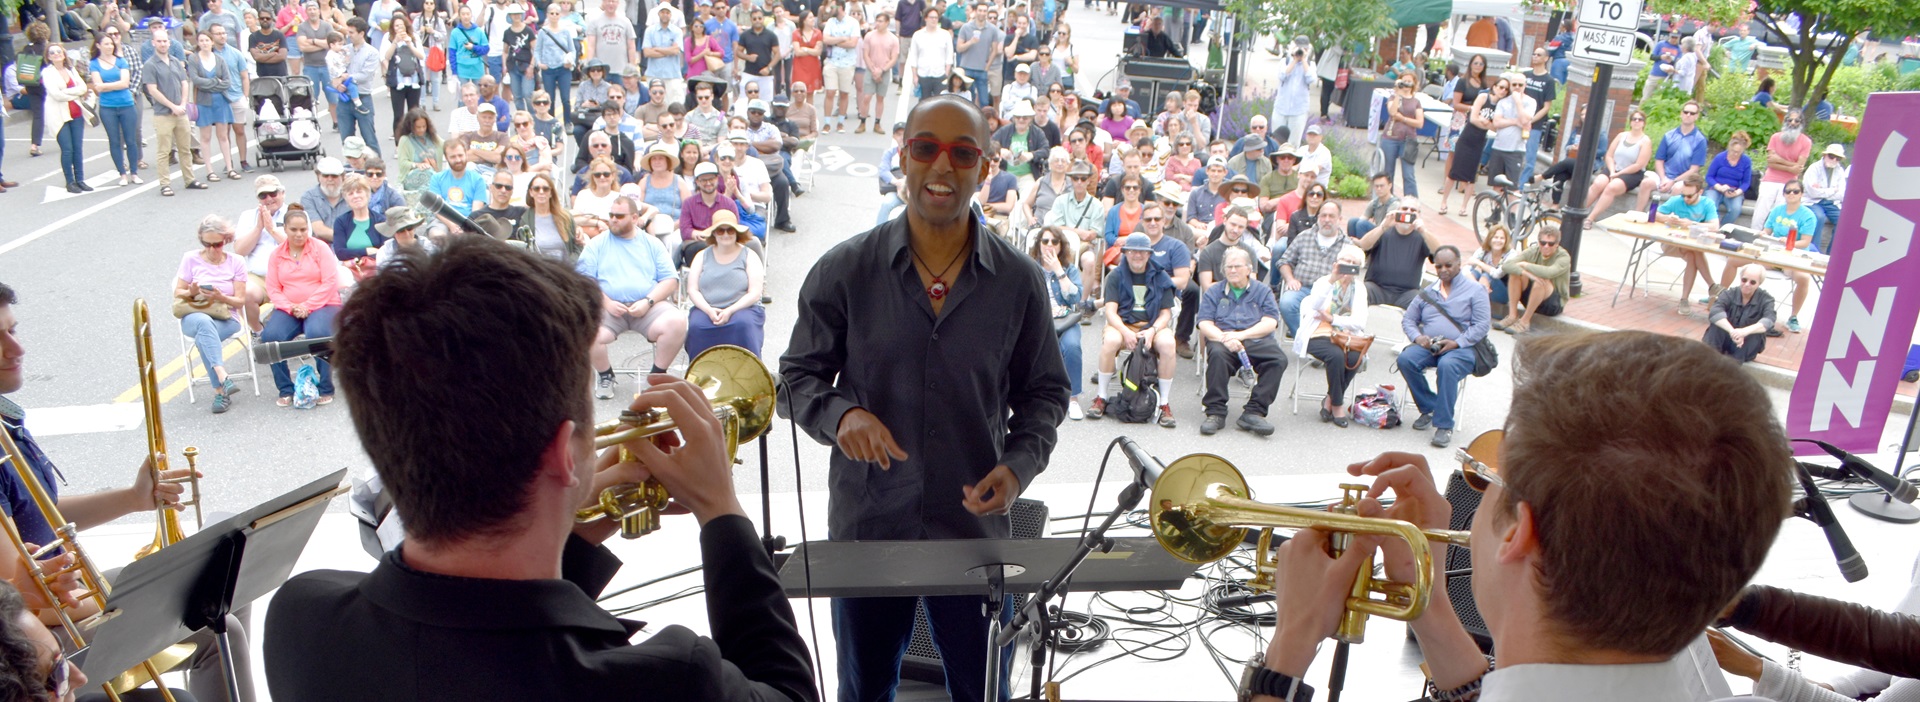 Kevin Harris Project performing on the Jazz, R&B & World Music Stage at the 2019 Cambridge Arts River Festival.